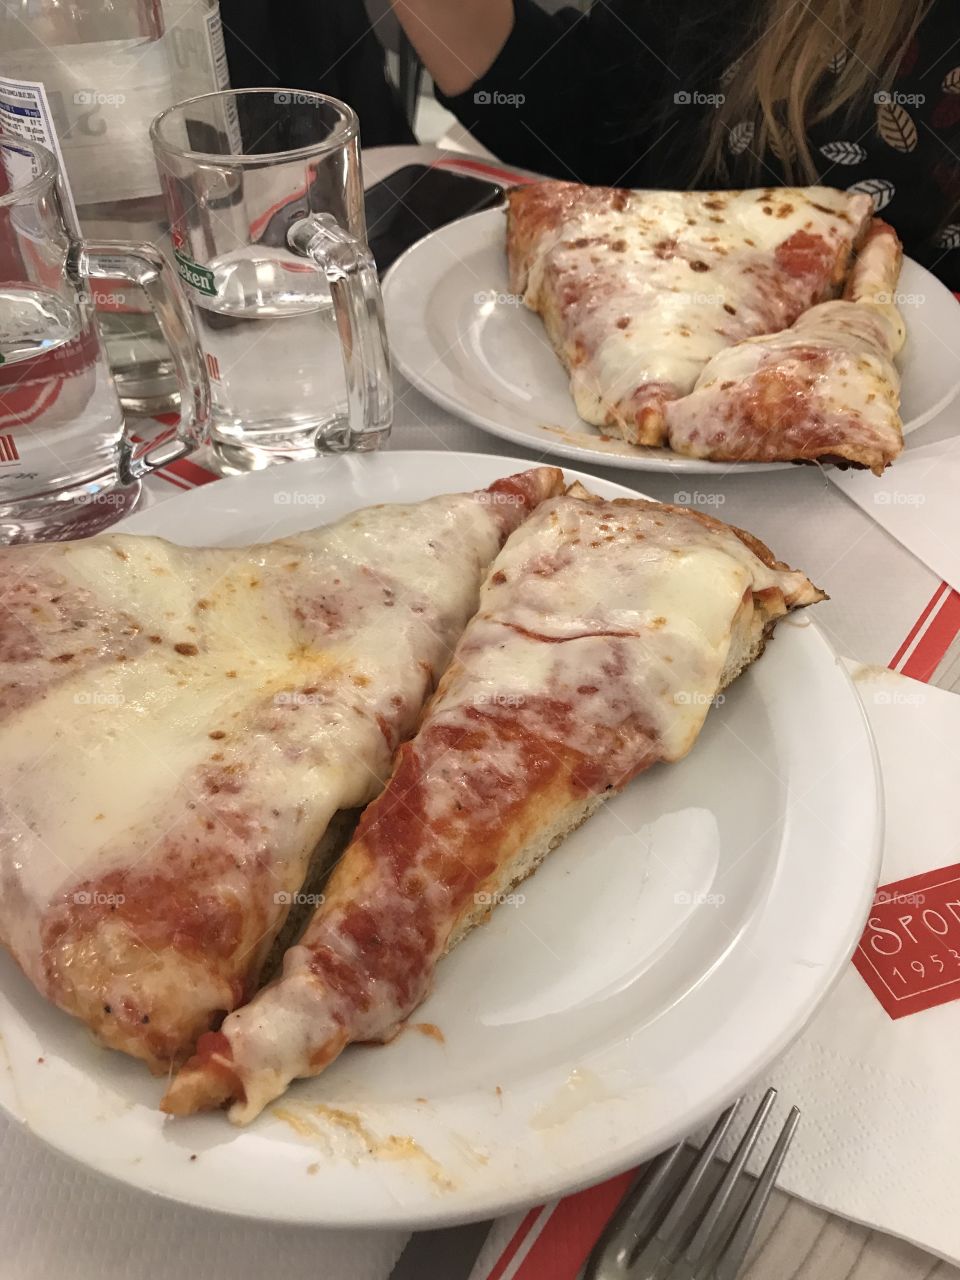 The typical Milanese pizza, Spontini